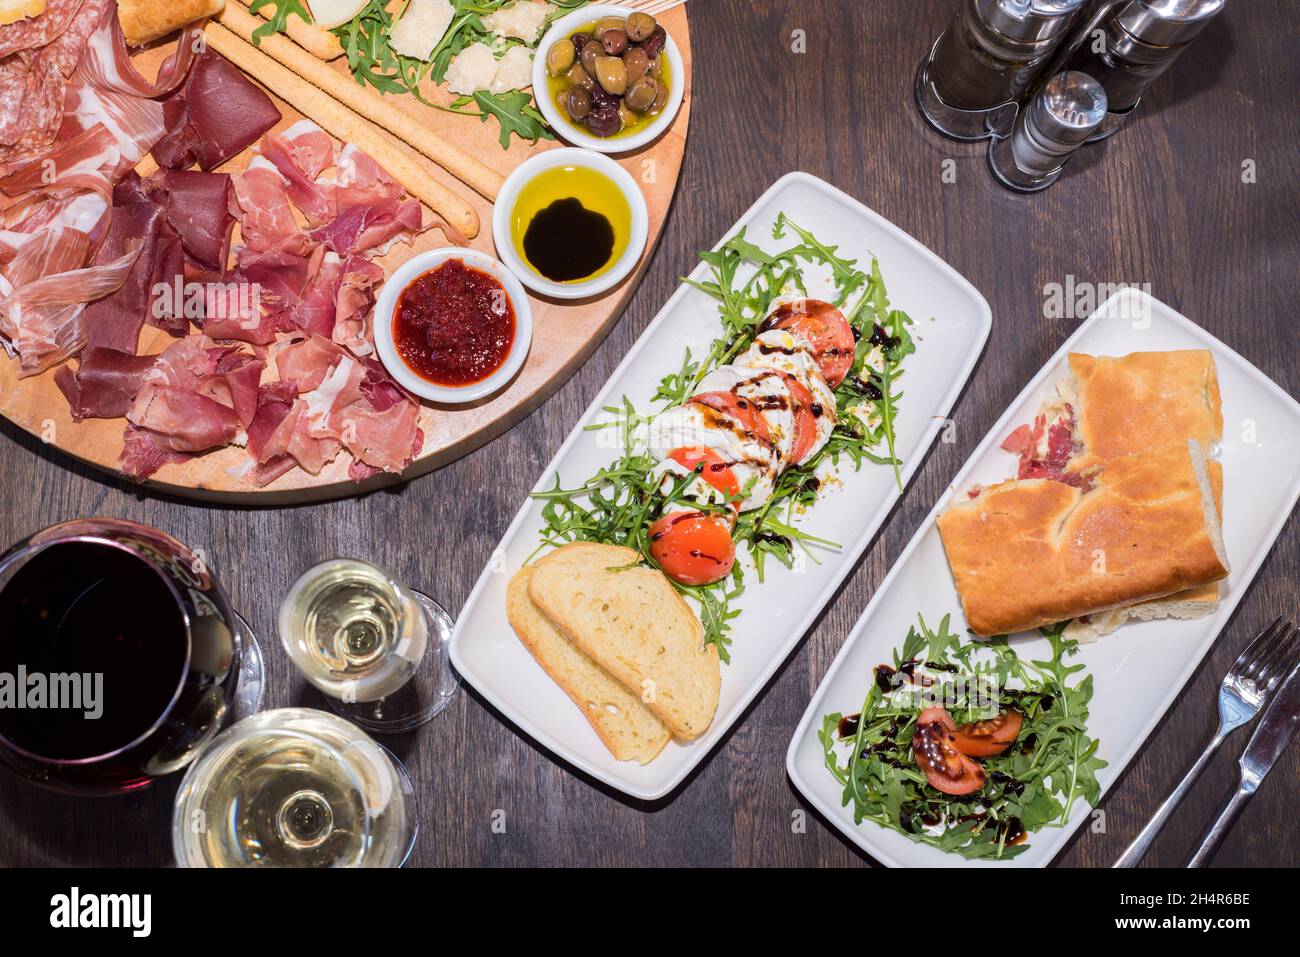 Sheffield, 29 Jan 2018 – Cold meat and cheese sharing platter, mozarella starter, focaccia sandwich and selected red and white wines at Veeno Stock Photo